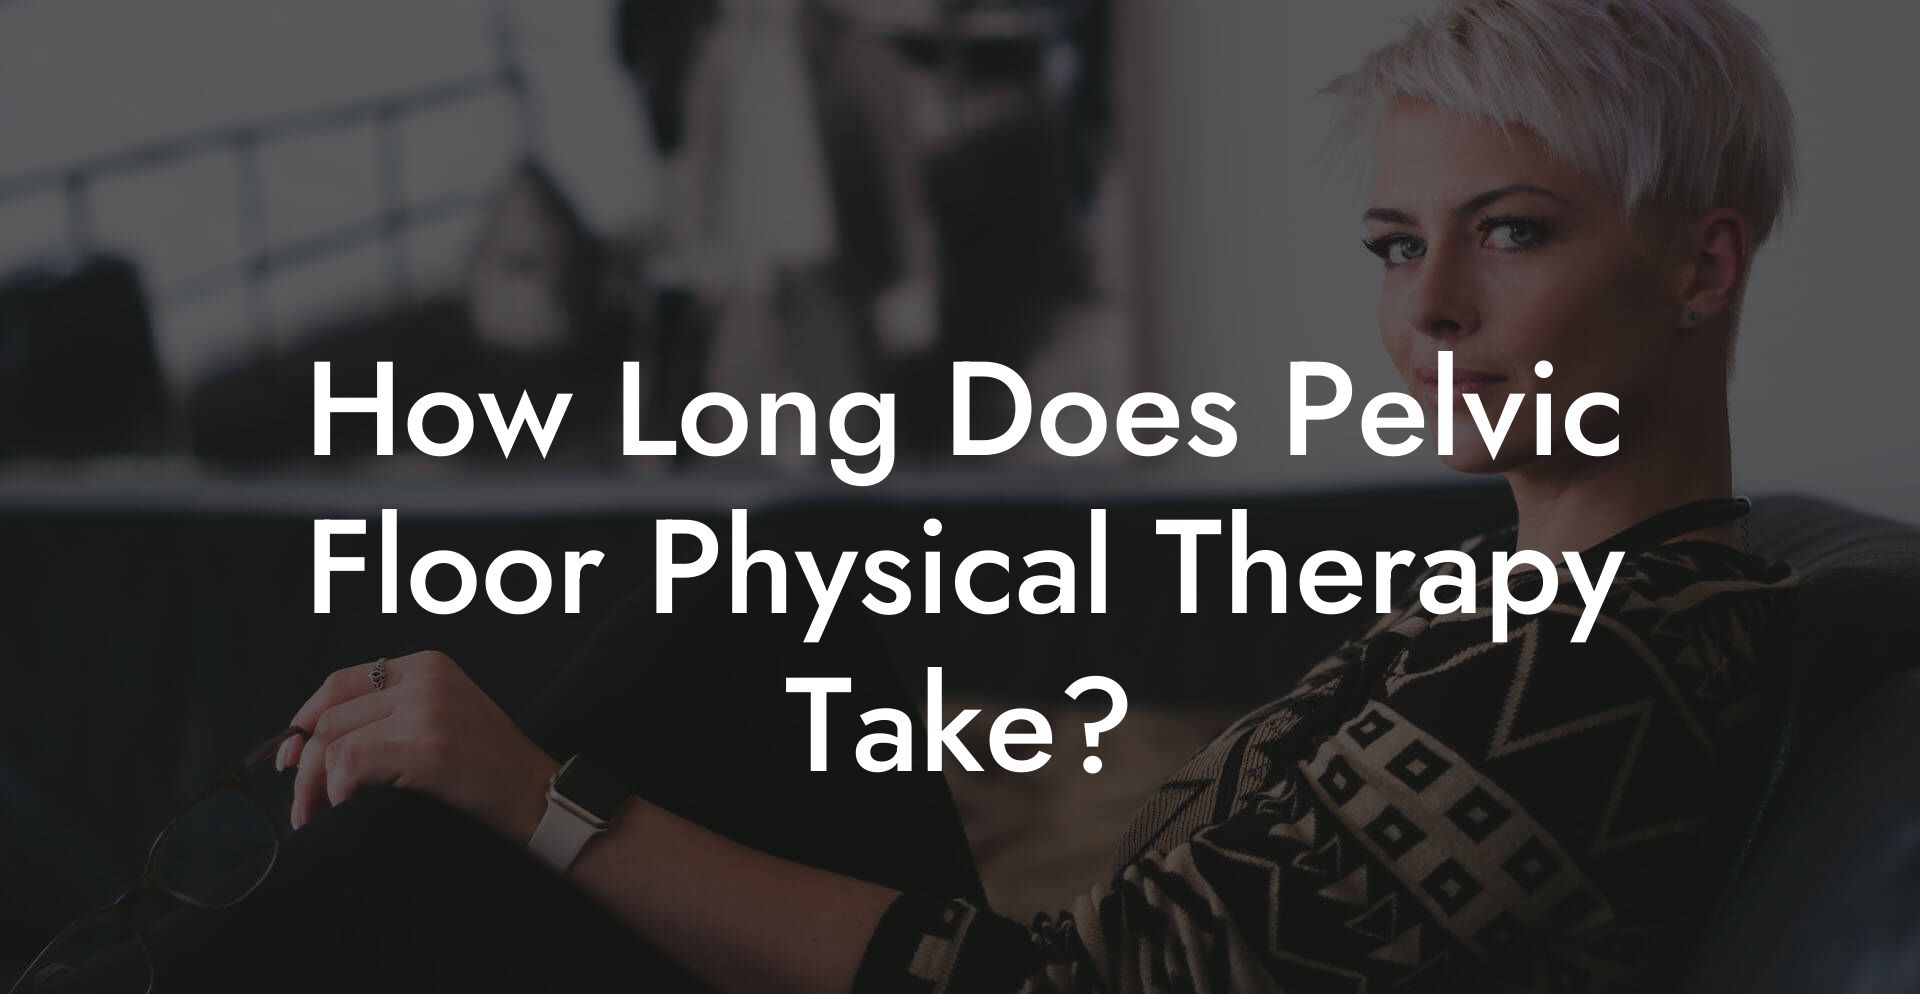 How Long Does Pelvic Floor Physical Therapy Take?